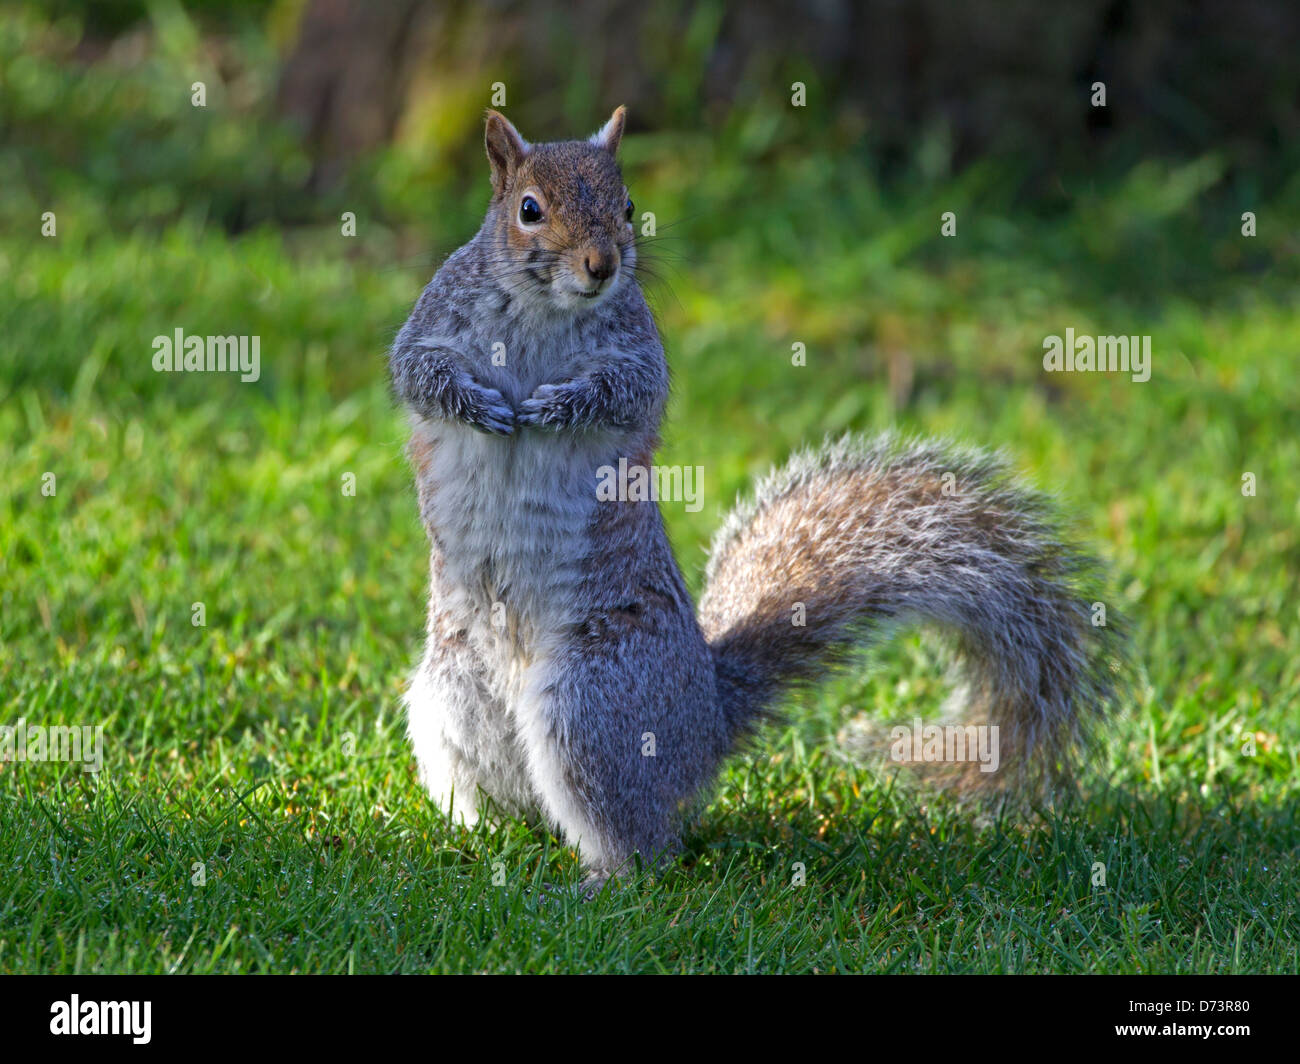 Grey squirrel standing upright Stock Photo